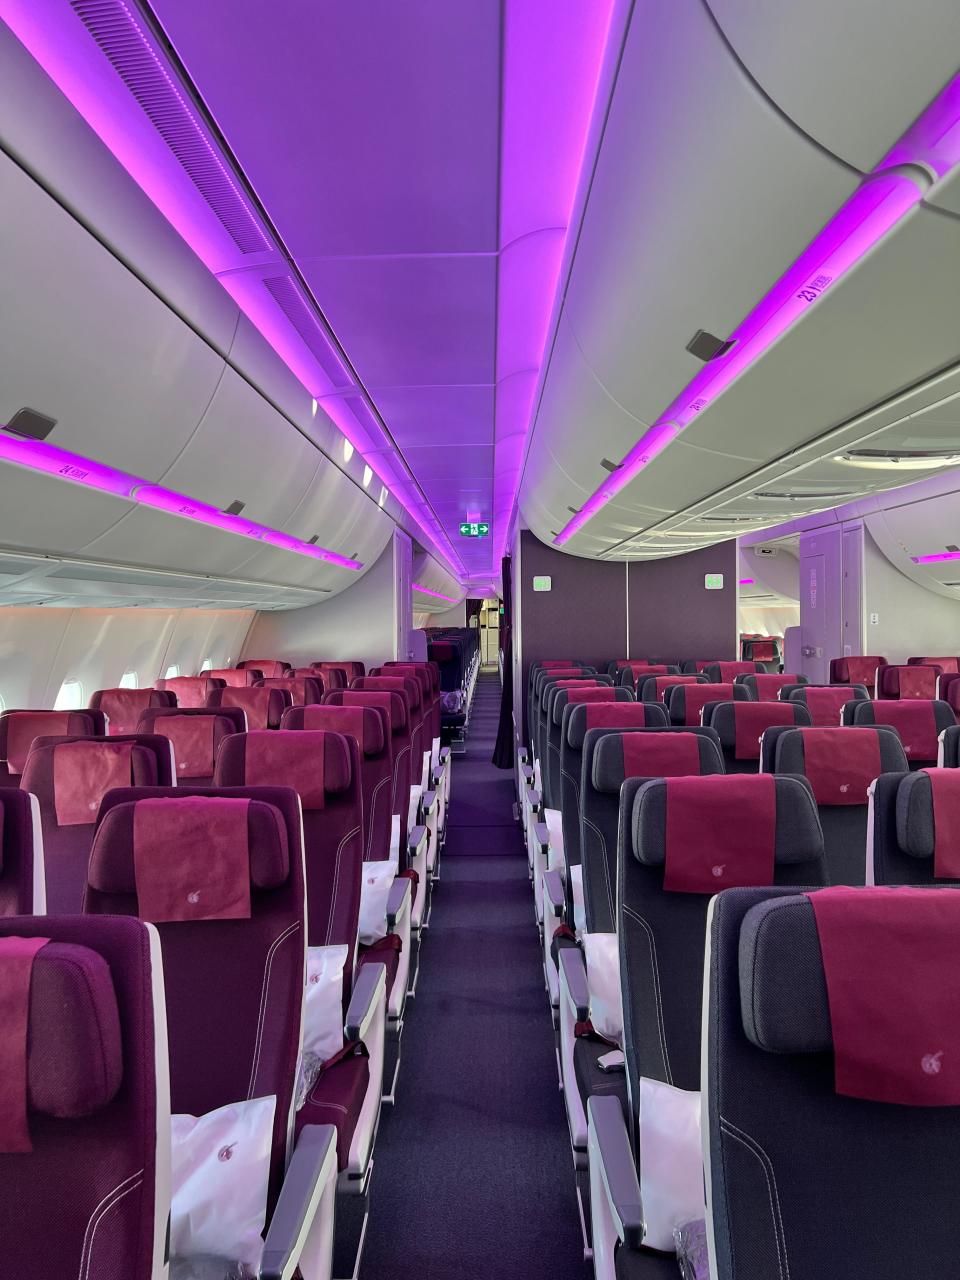 A view down the aisle of economy class in an A350, with purple accent lighting and burgundy and black seats.